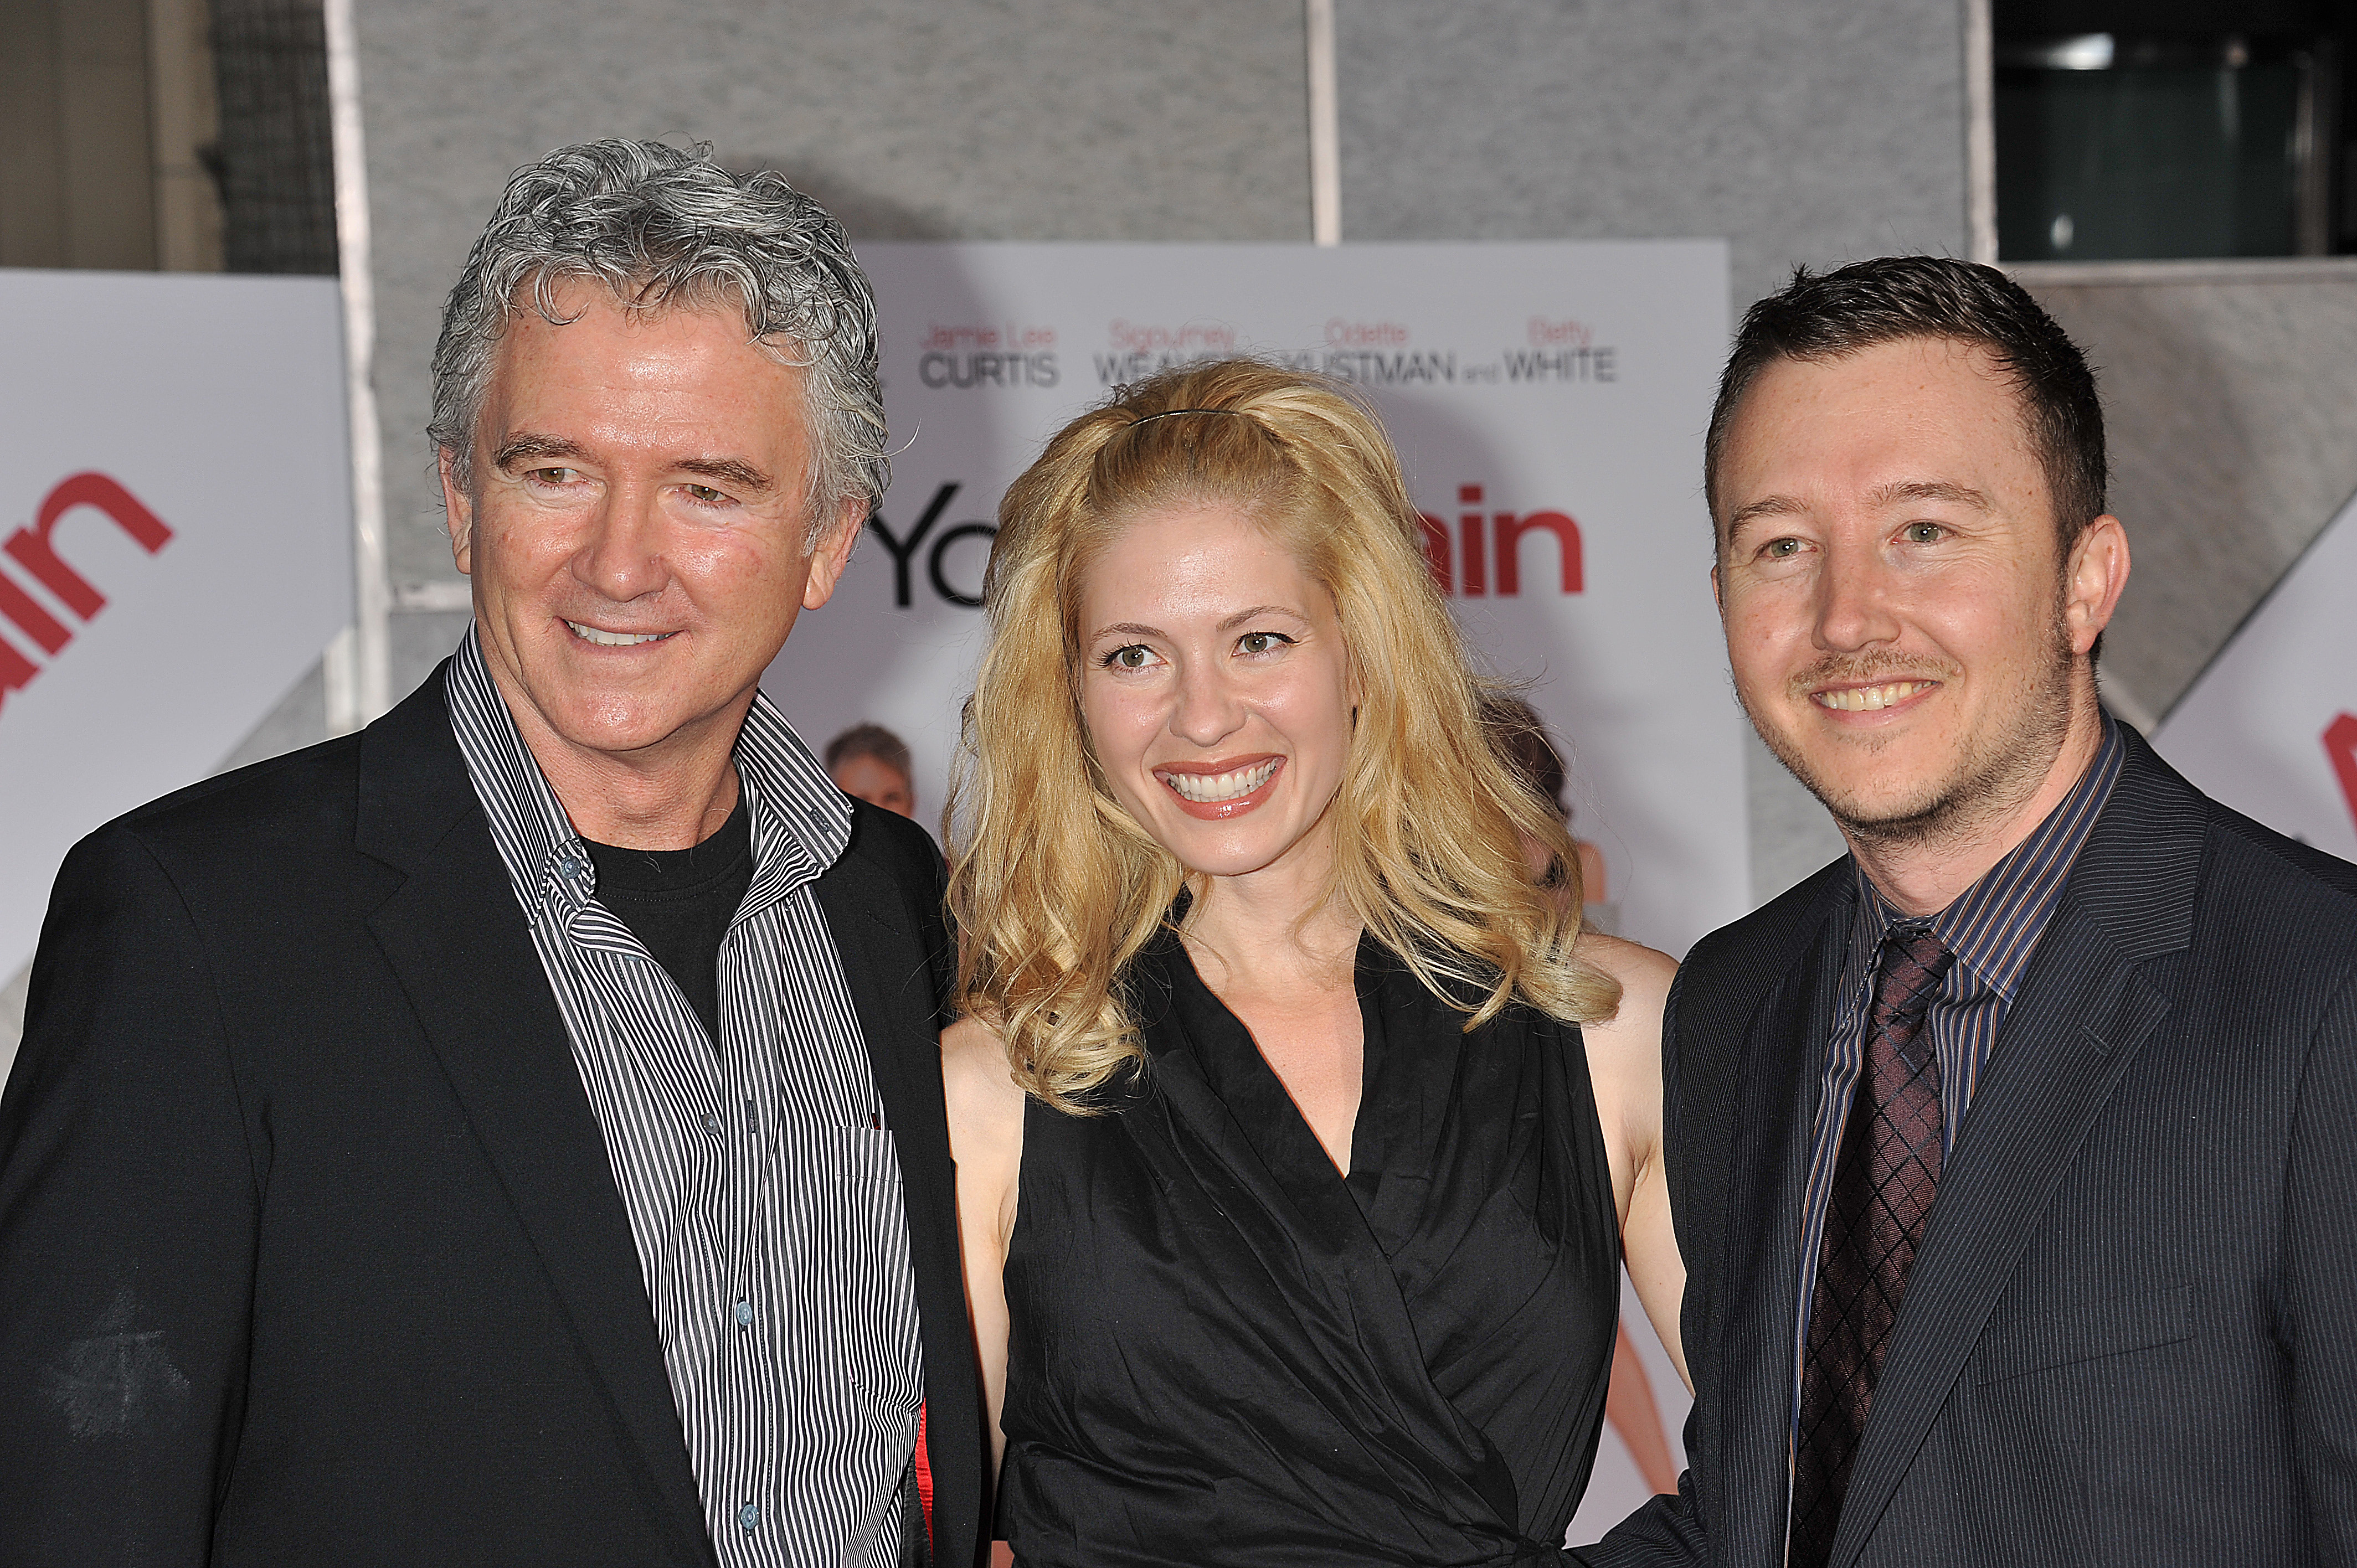 Patrick Duffy, Emily Kosloski, and Padraic Duffy at the premiere of "You Again" om September 22, 2010, in Hollywood, California. | Source: Getty Images